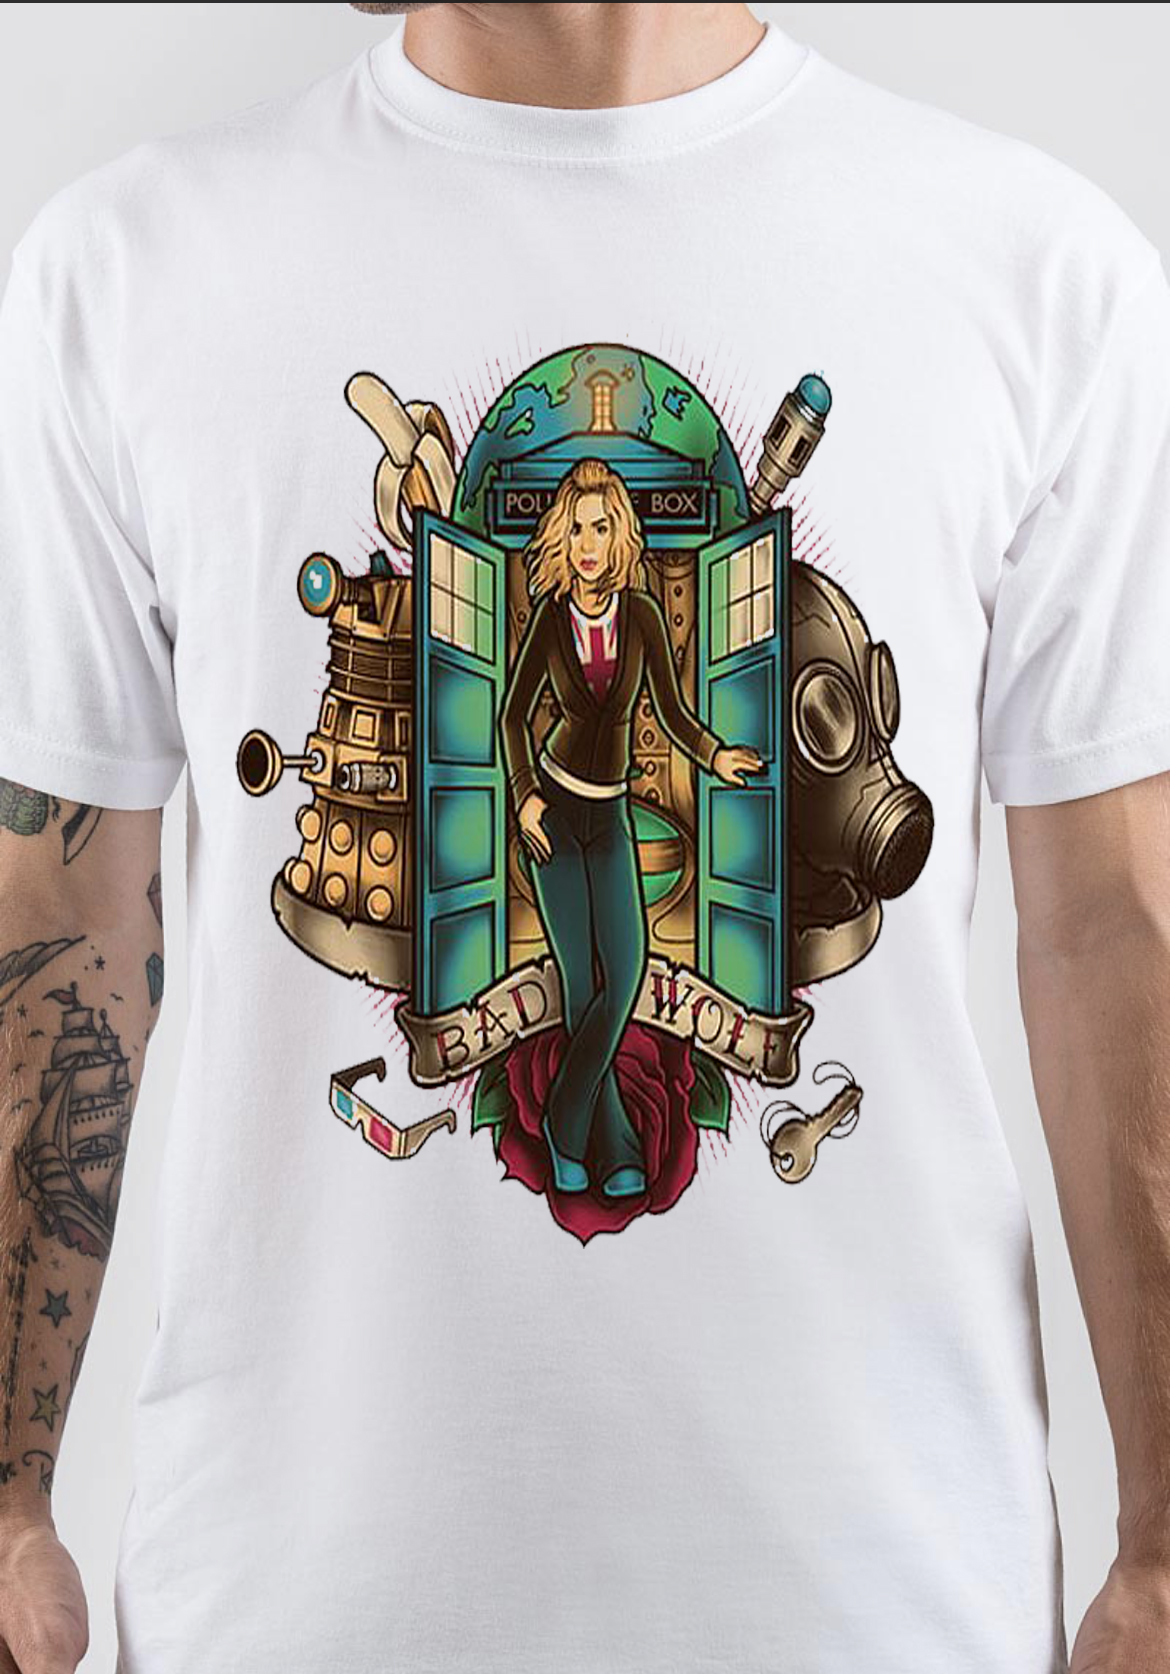 Tenth Doctor T-Shirt And Merchandise